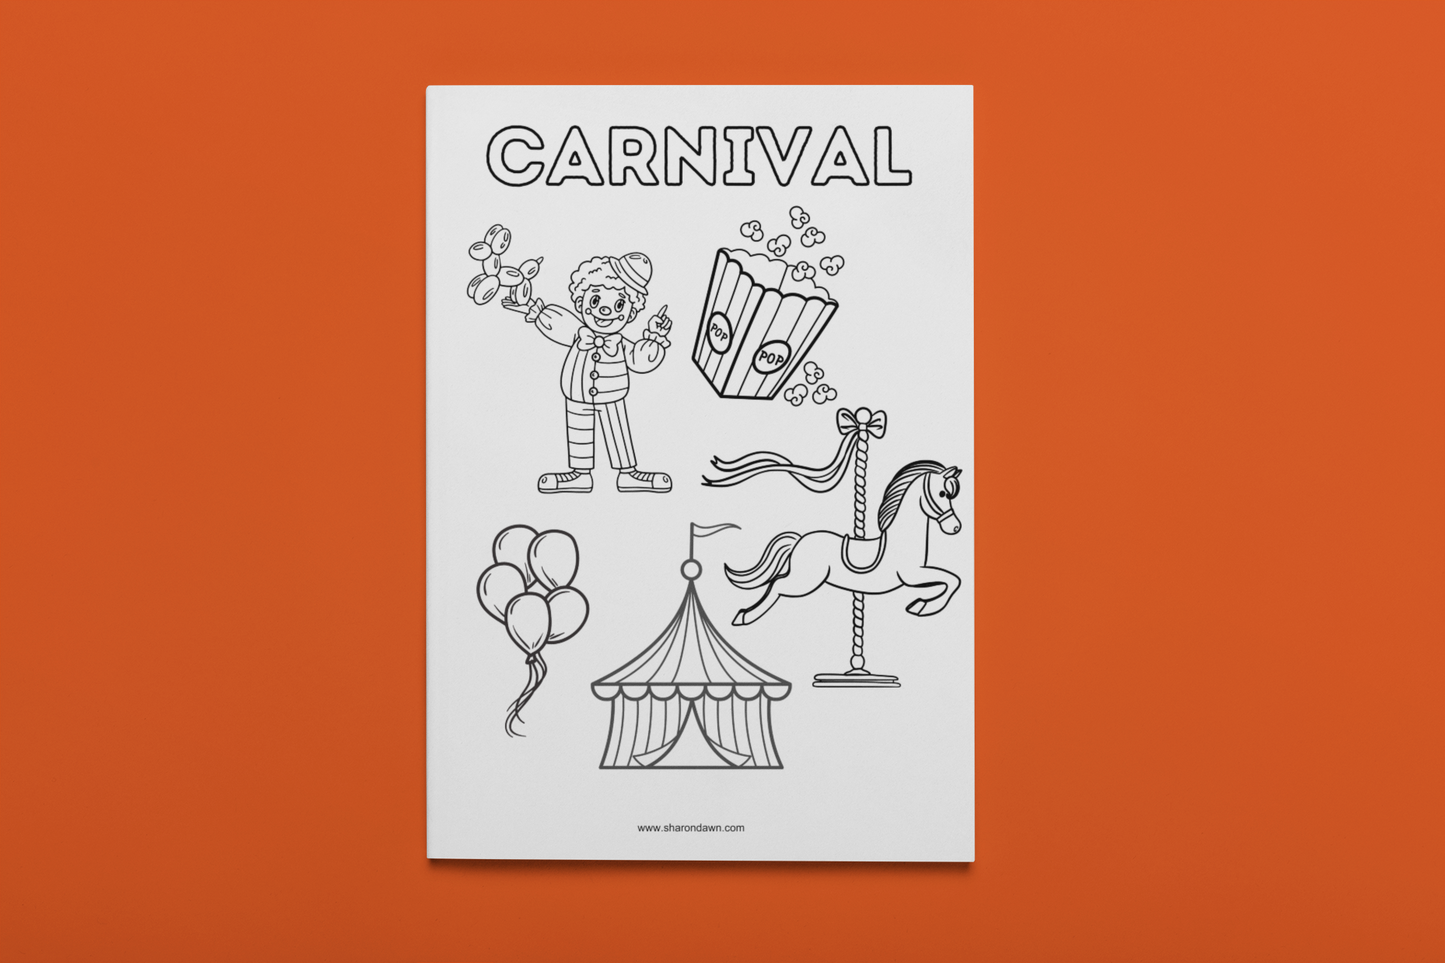 Carnival - Colouring Page - Printable Digital Download ~ Sharon Dawn Collection